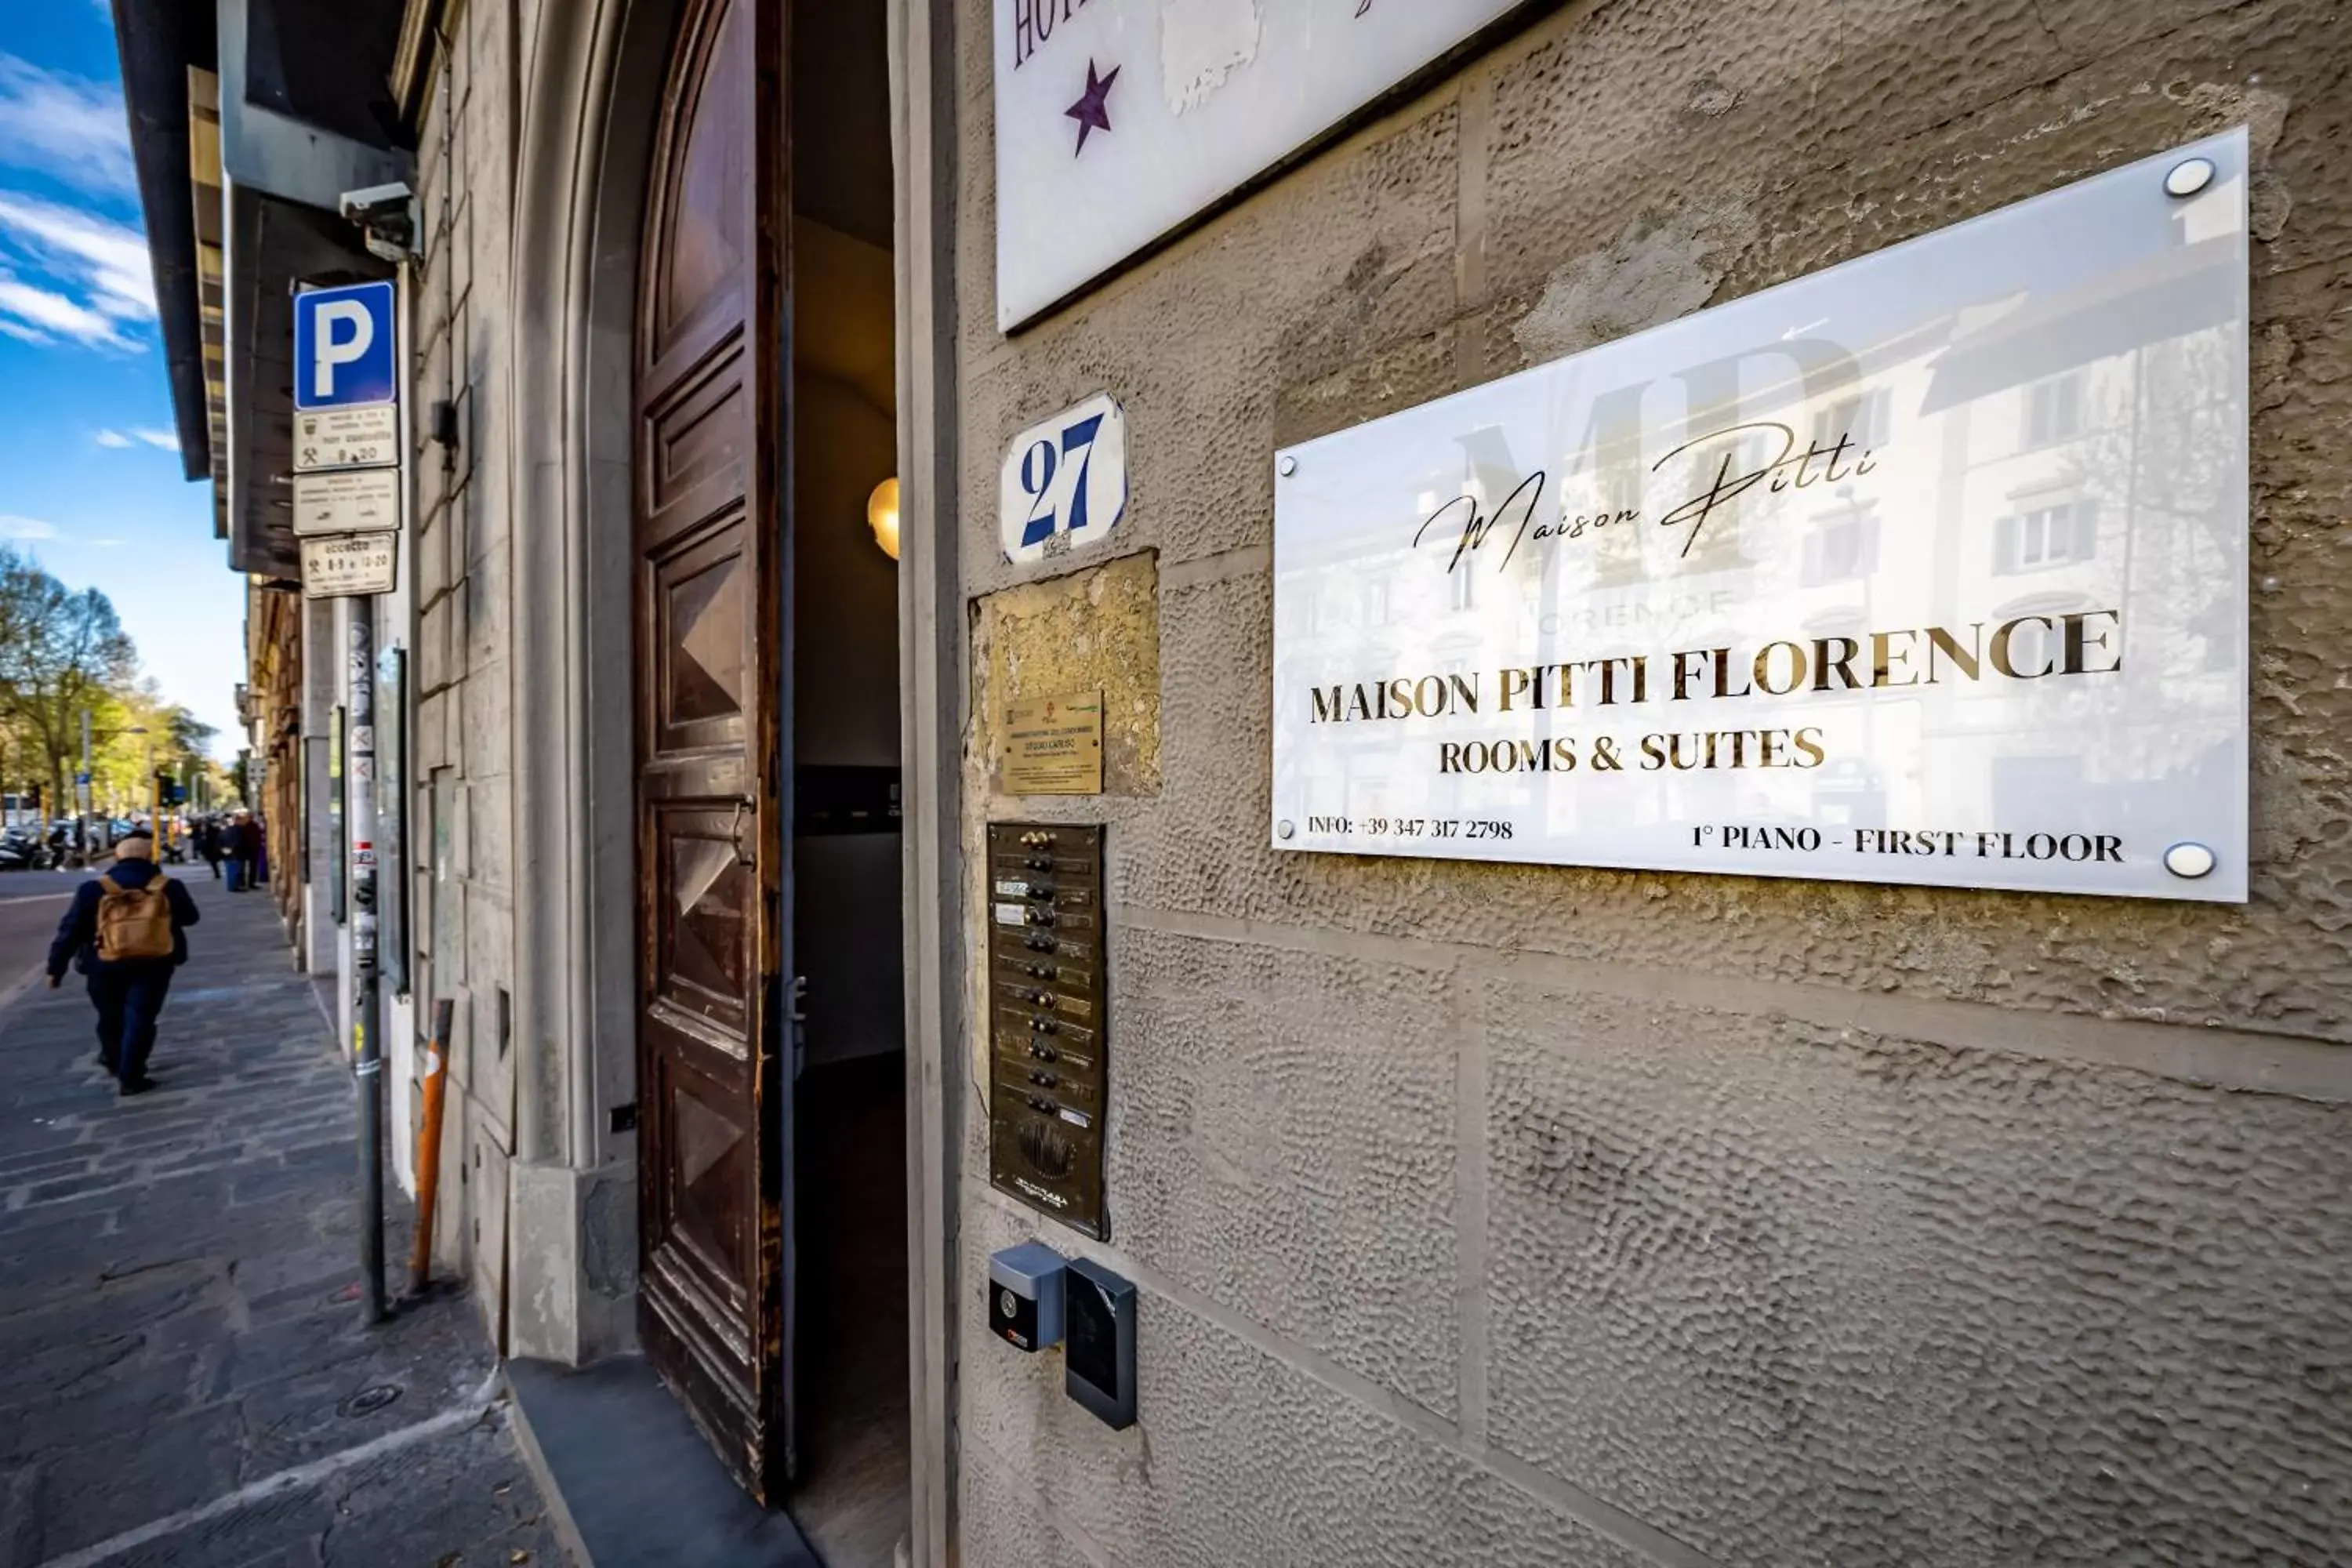 Property building in Maison Pitti Florence